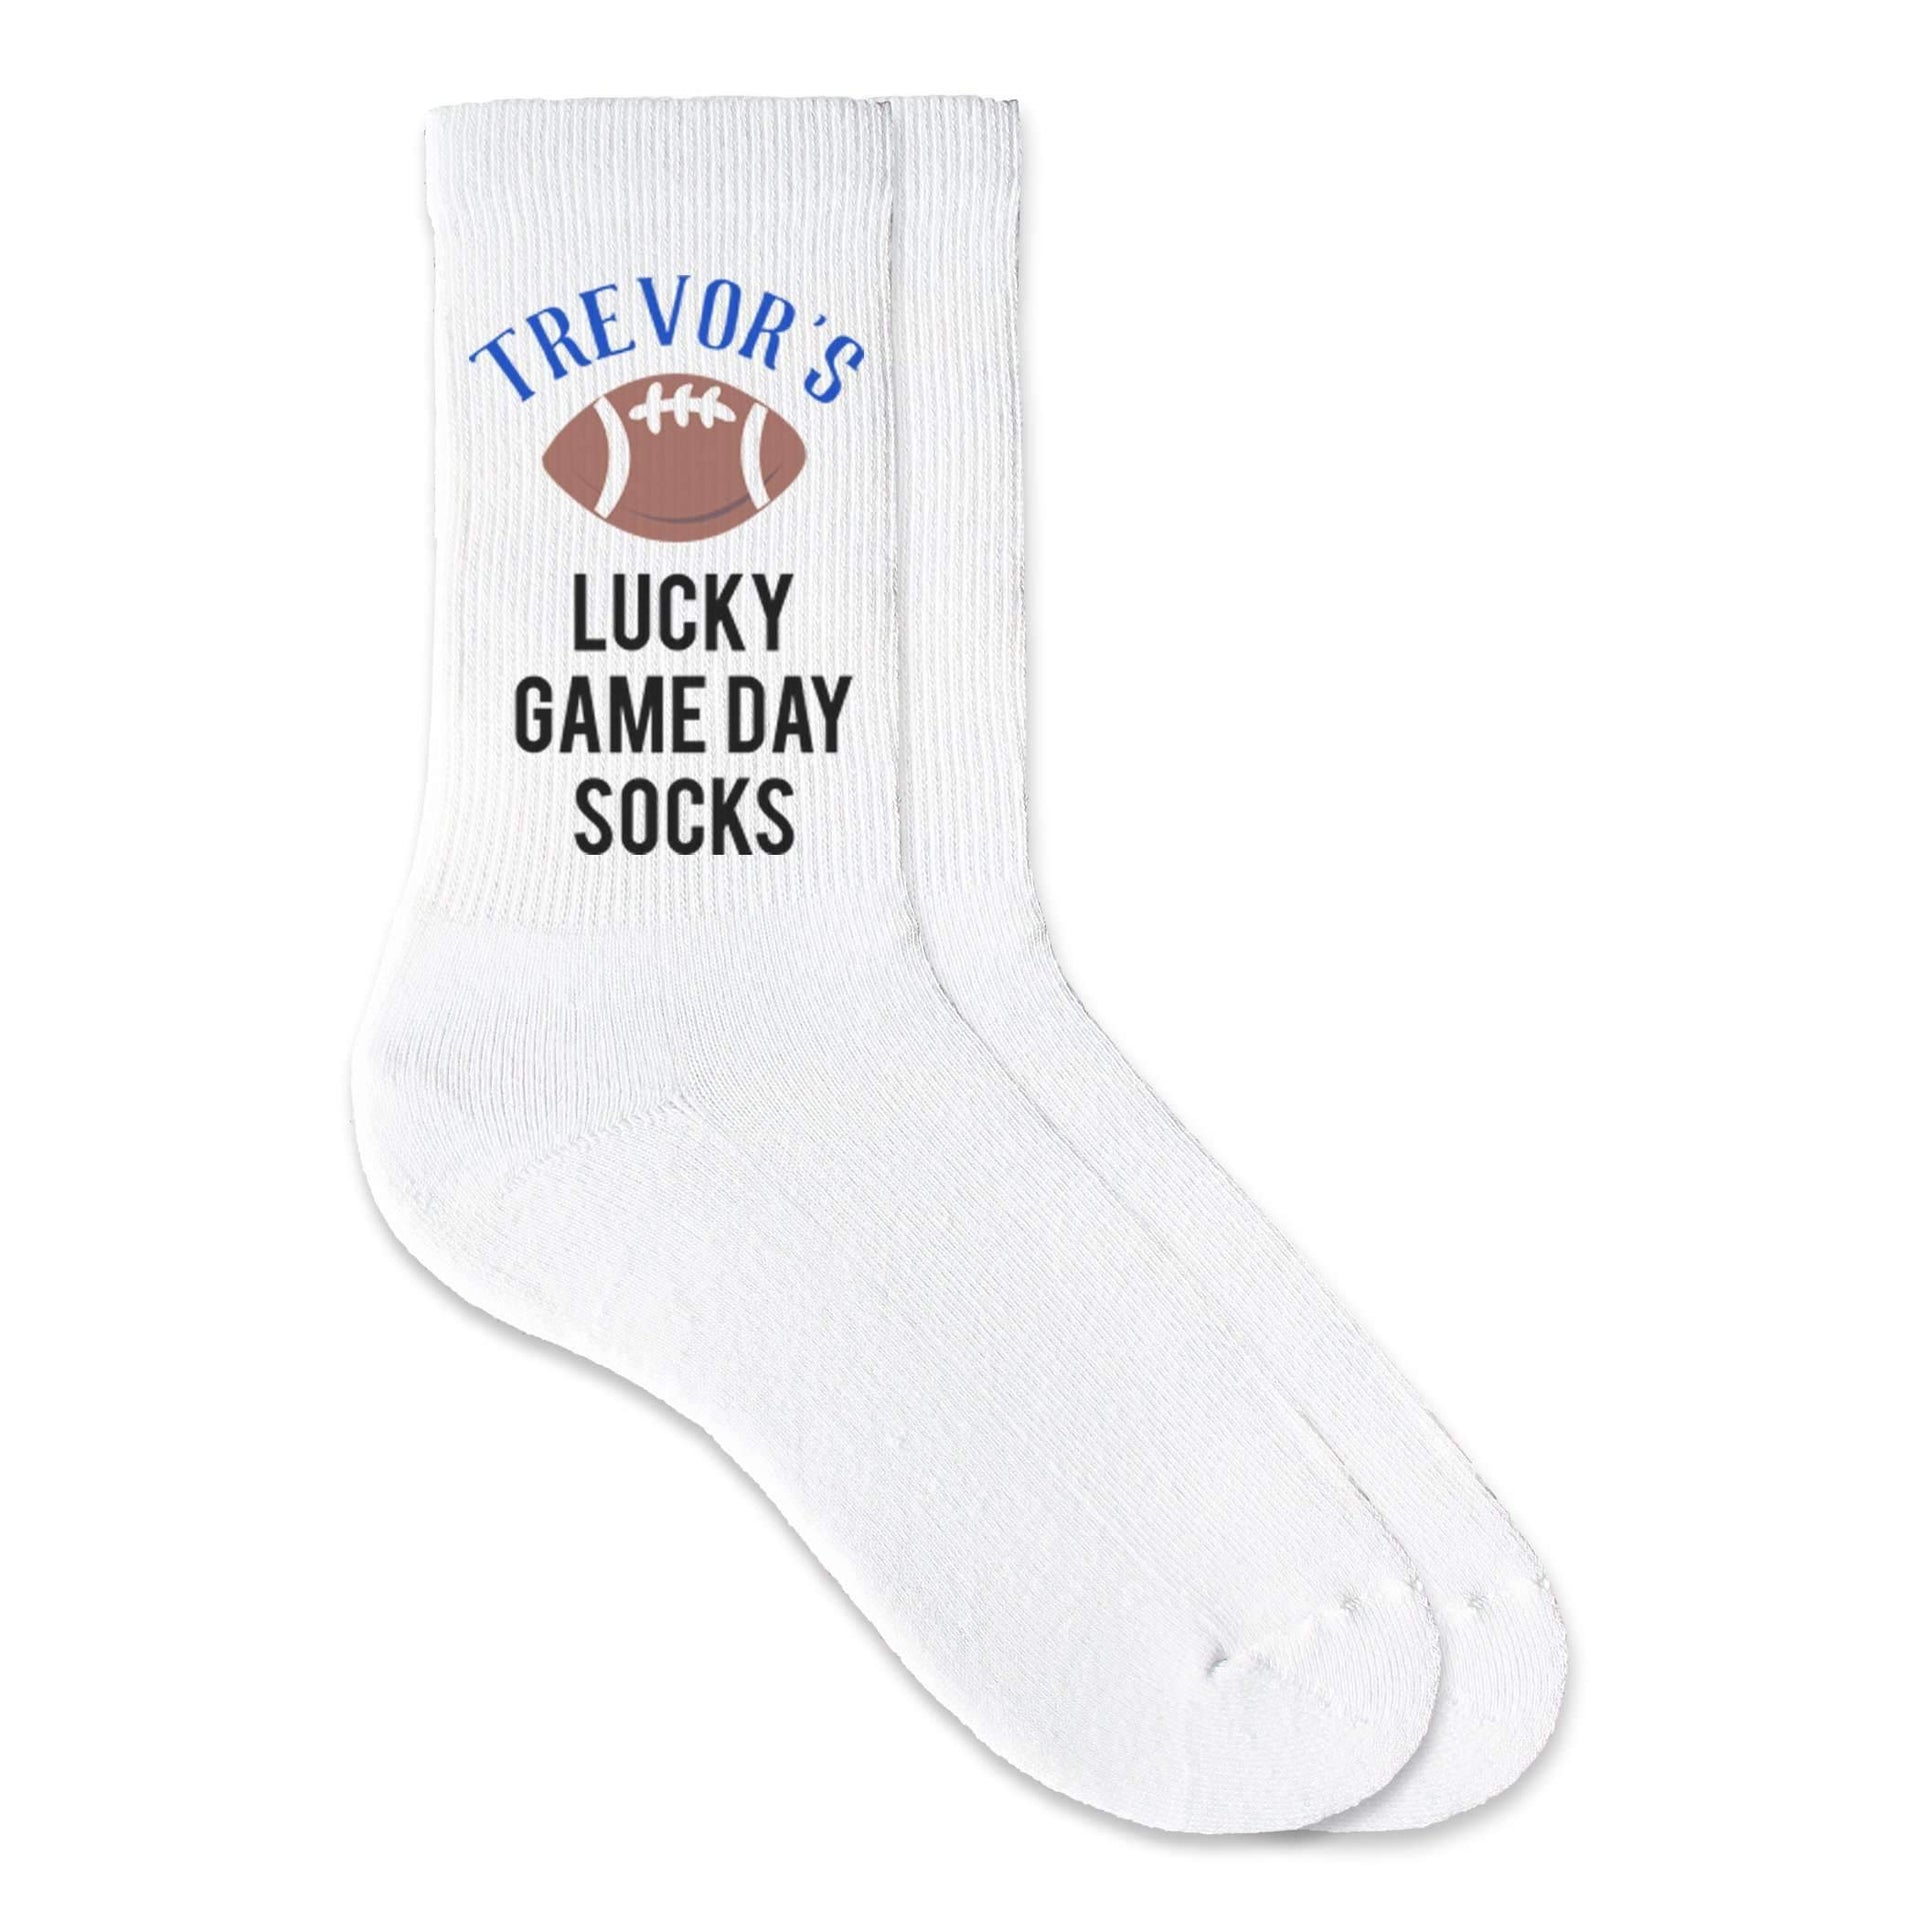 Lucky game day socks custom printed with name and football in color of your choice.